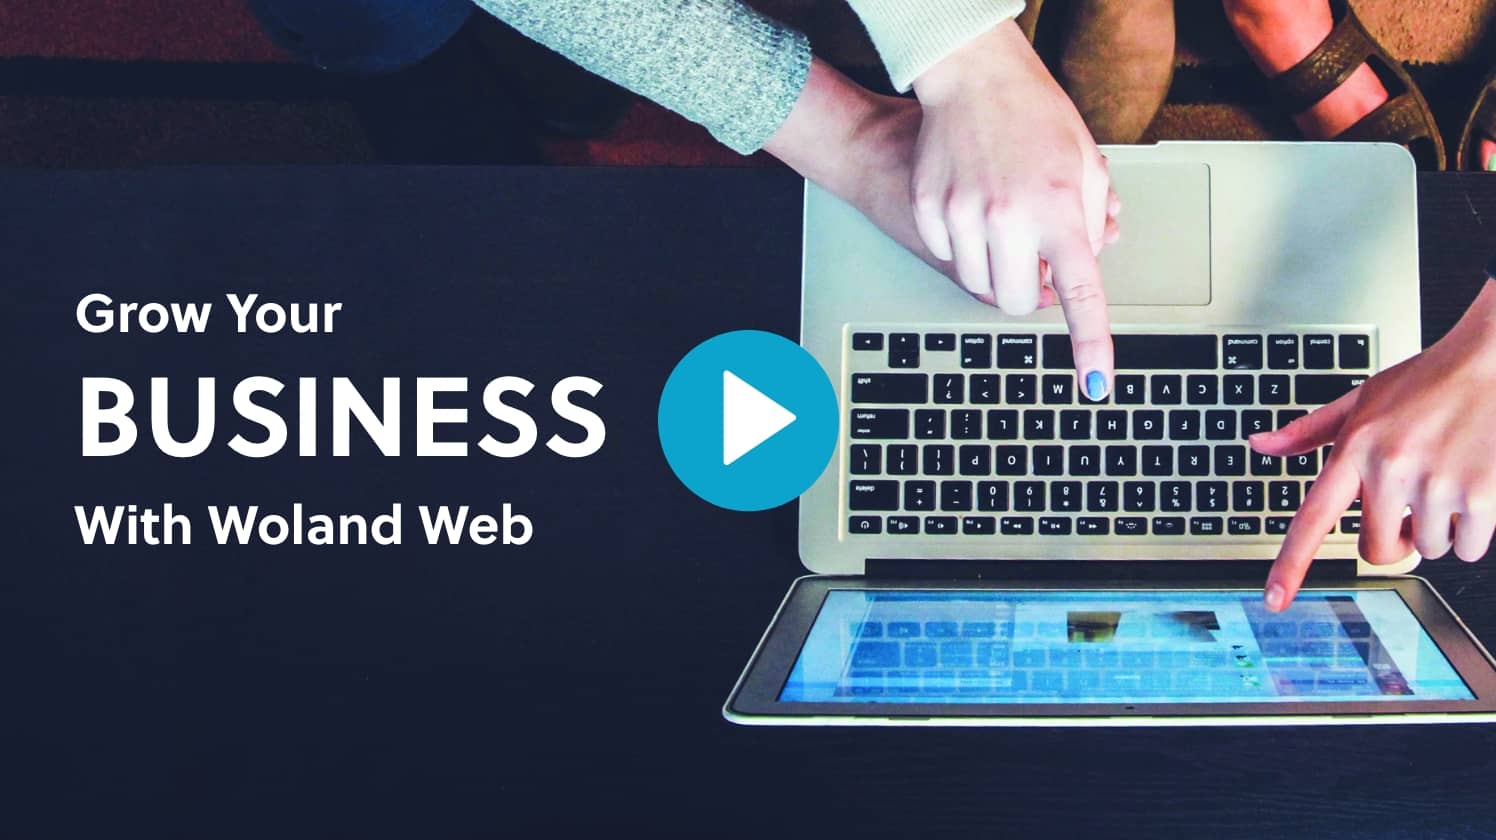 Video Thumbnail with text that reads "Grow Your Business with Woland Web"